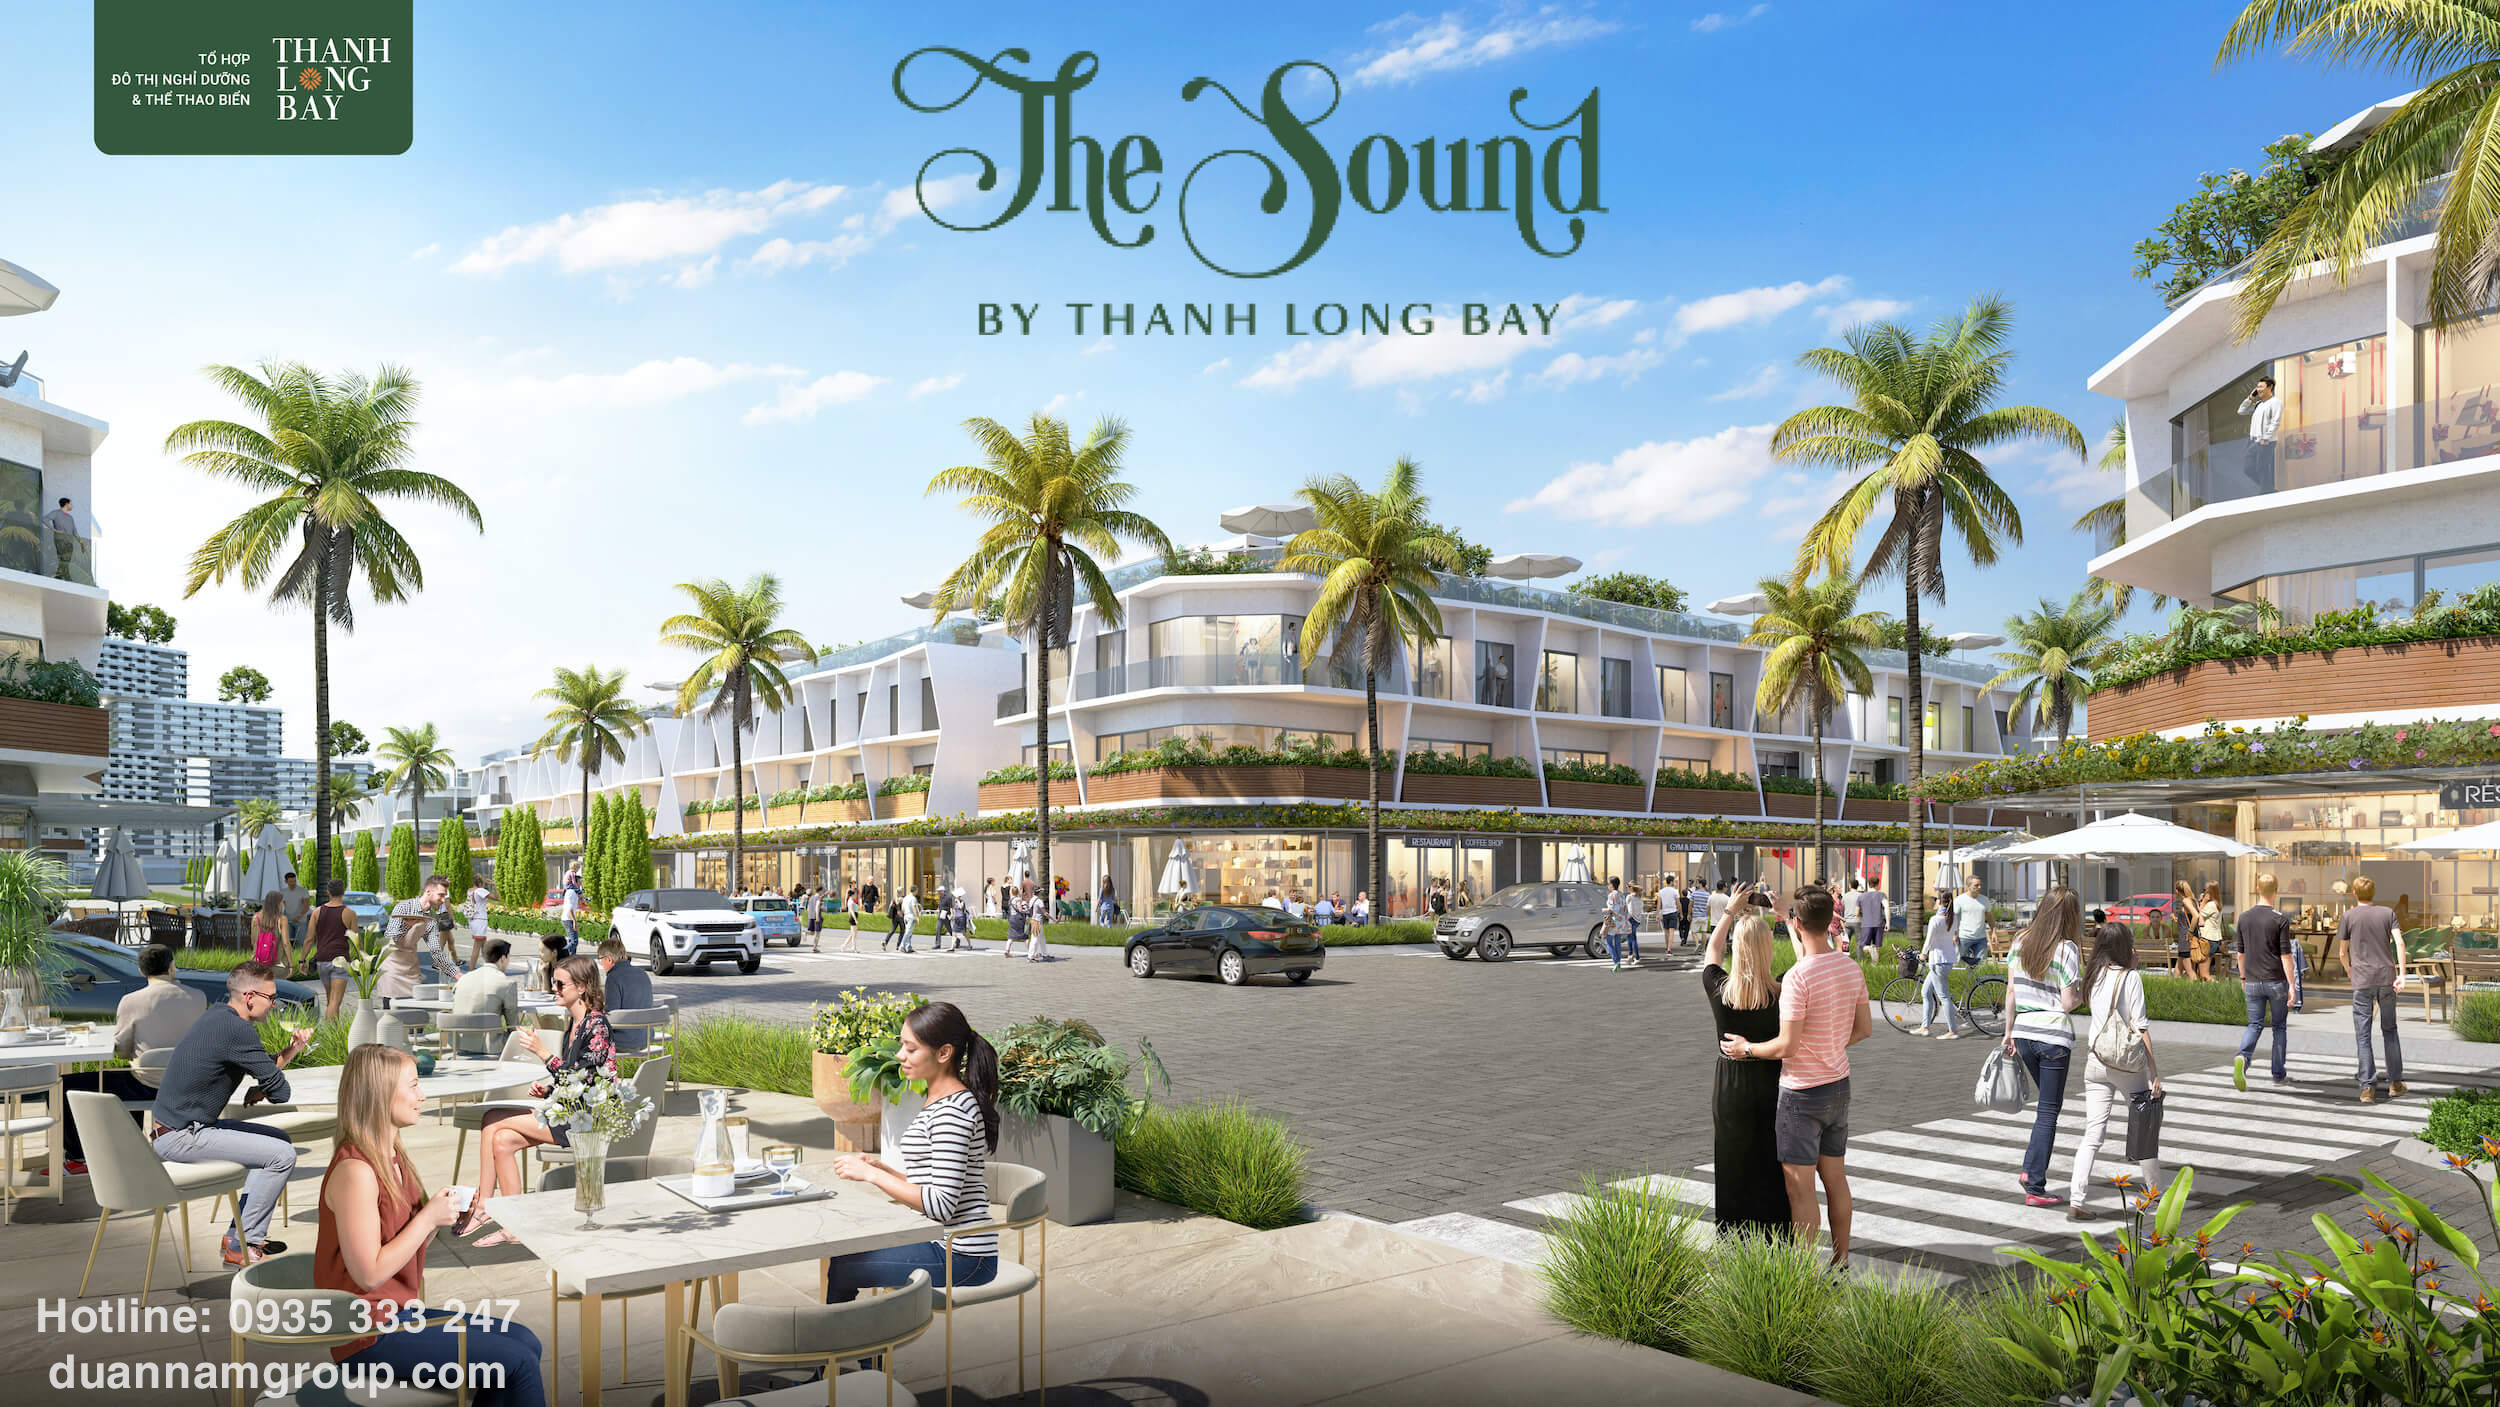 The Sound Thanh Long Bay